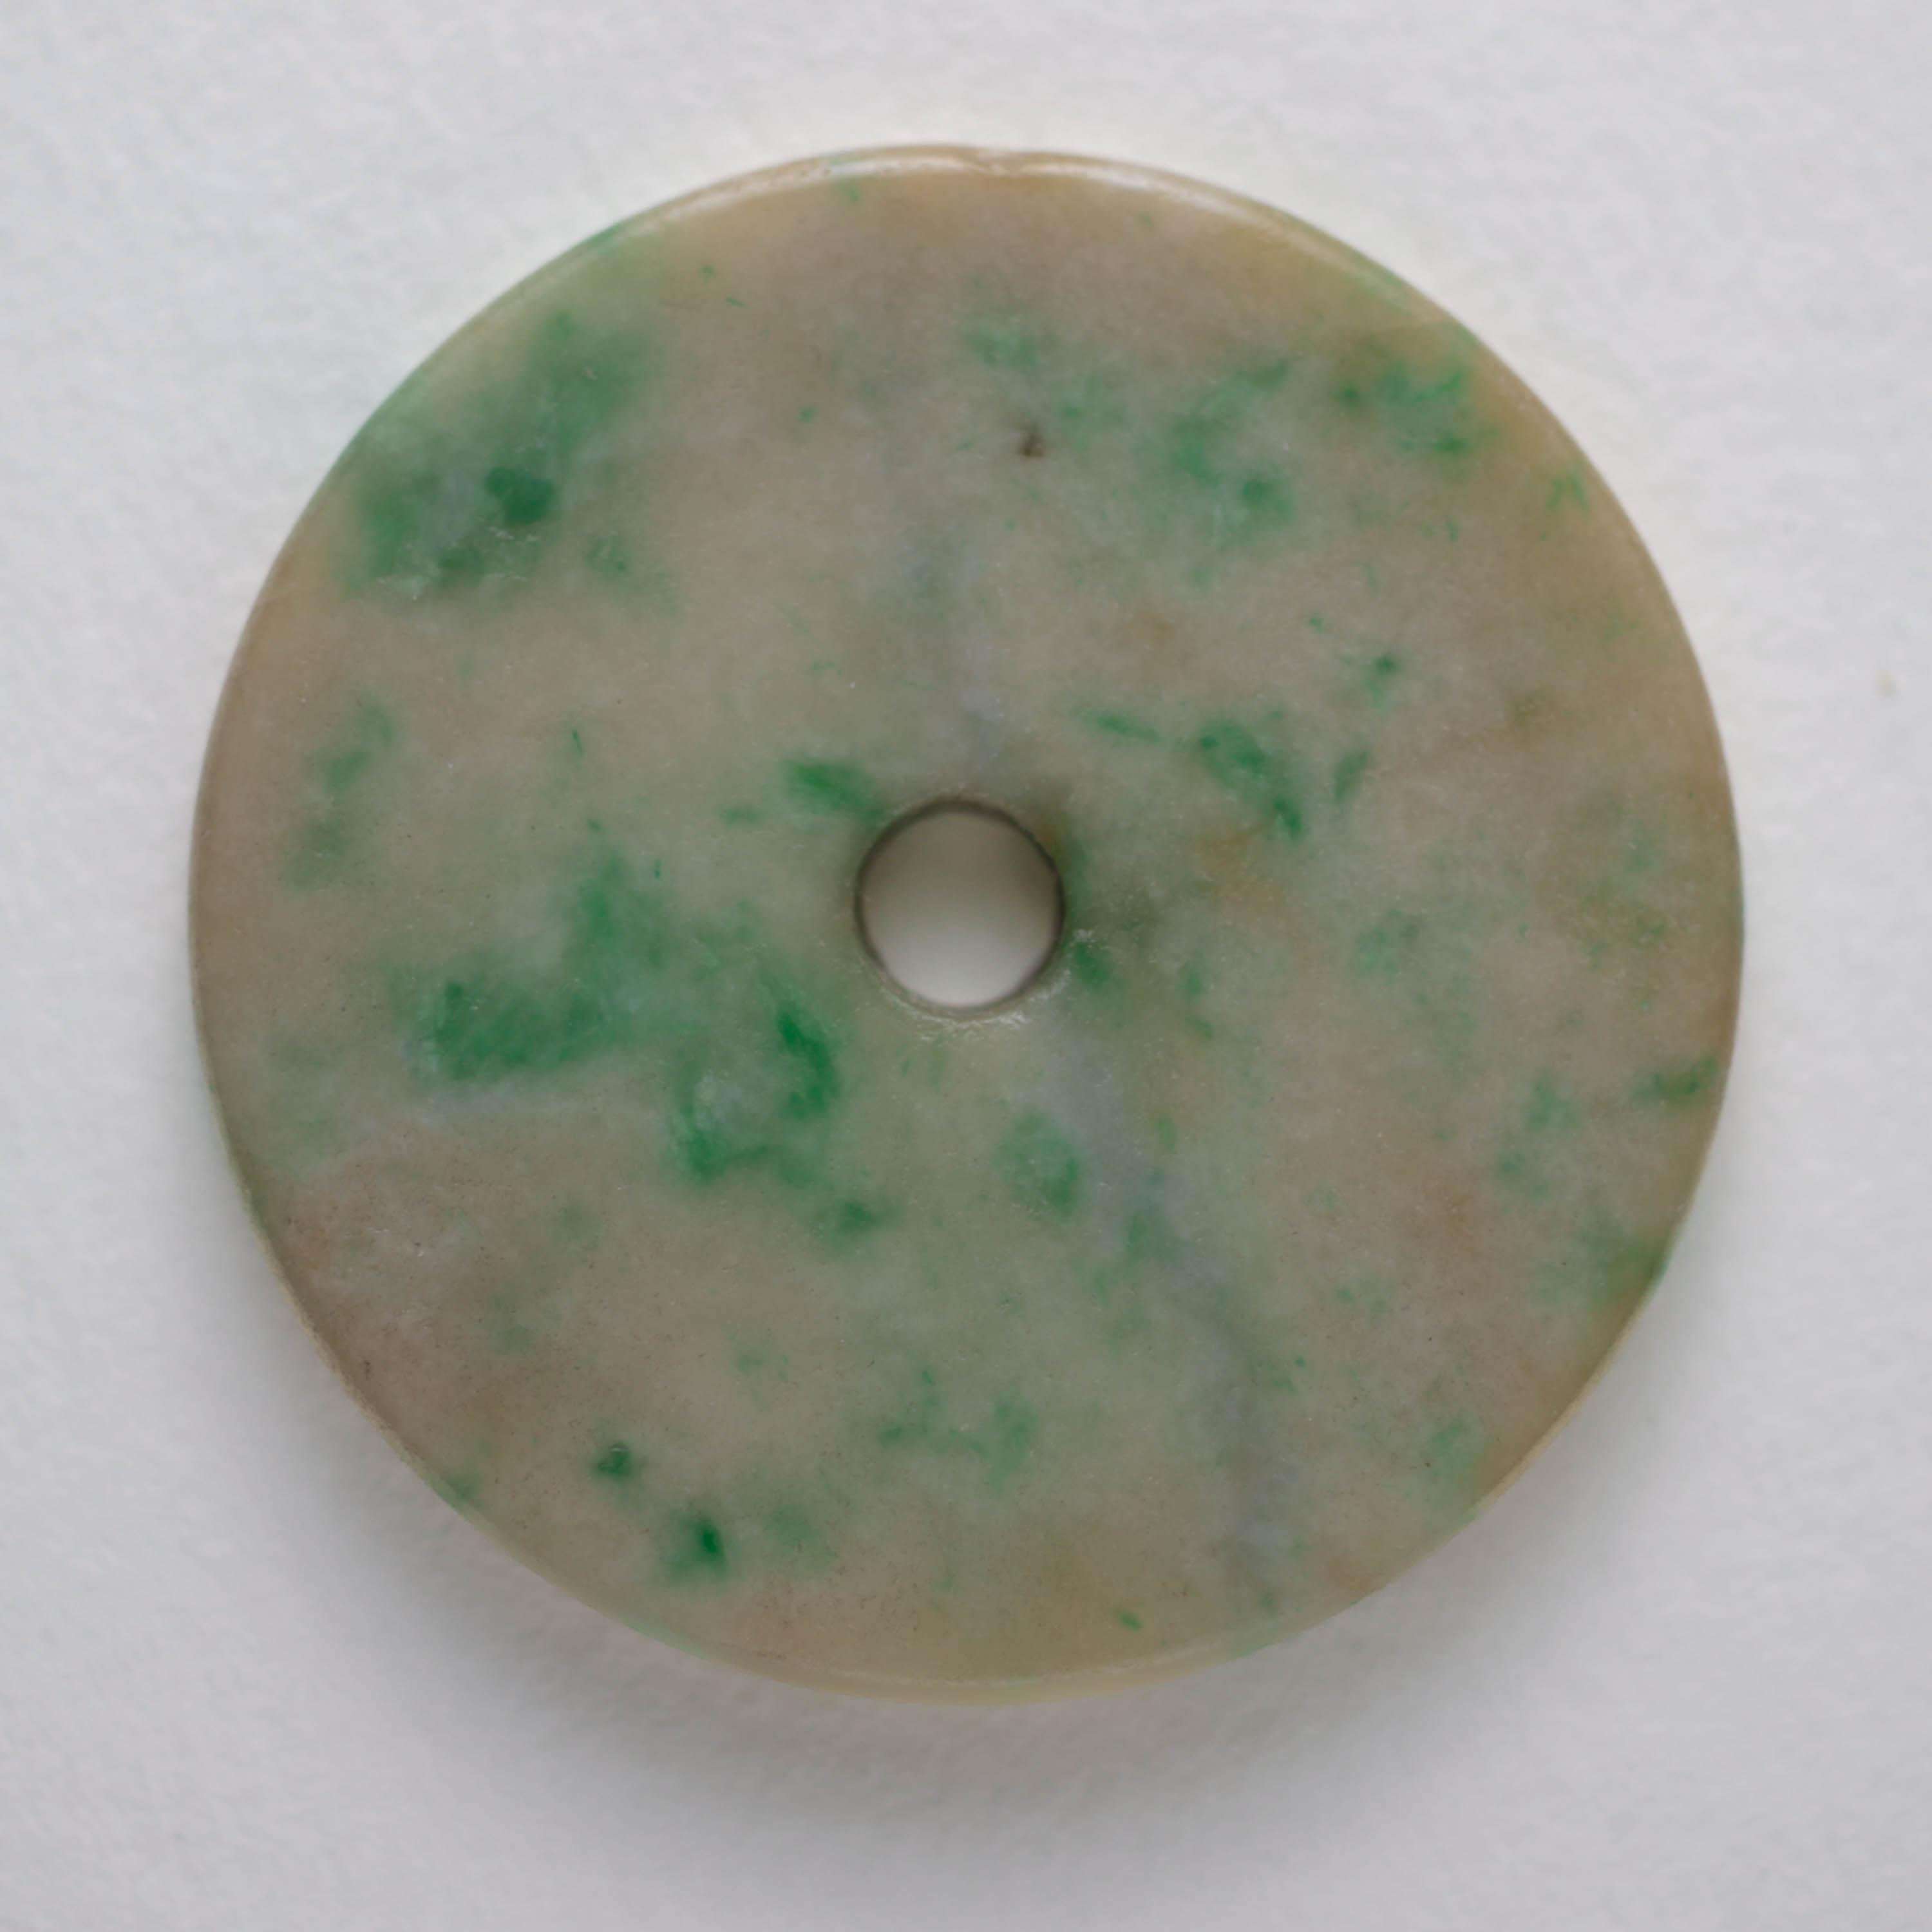 This exquisite Qing Dynasty period pi disk was carved by hand prior to 1900. The pi disk is simply carved, undecorated, and beautifully proportioned. The earliest Neolithic bi disks were simply carved and without ornamentation or decoration, exactly